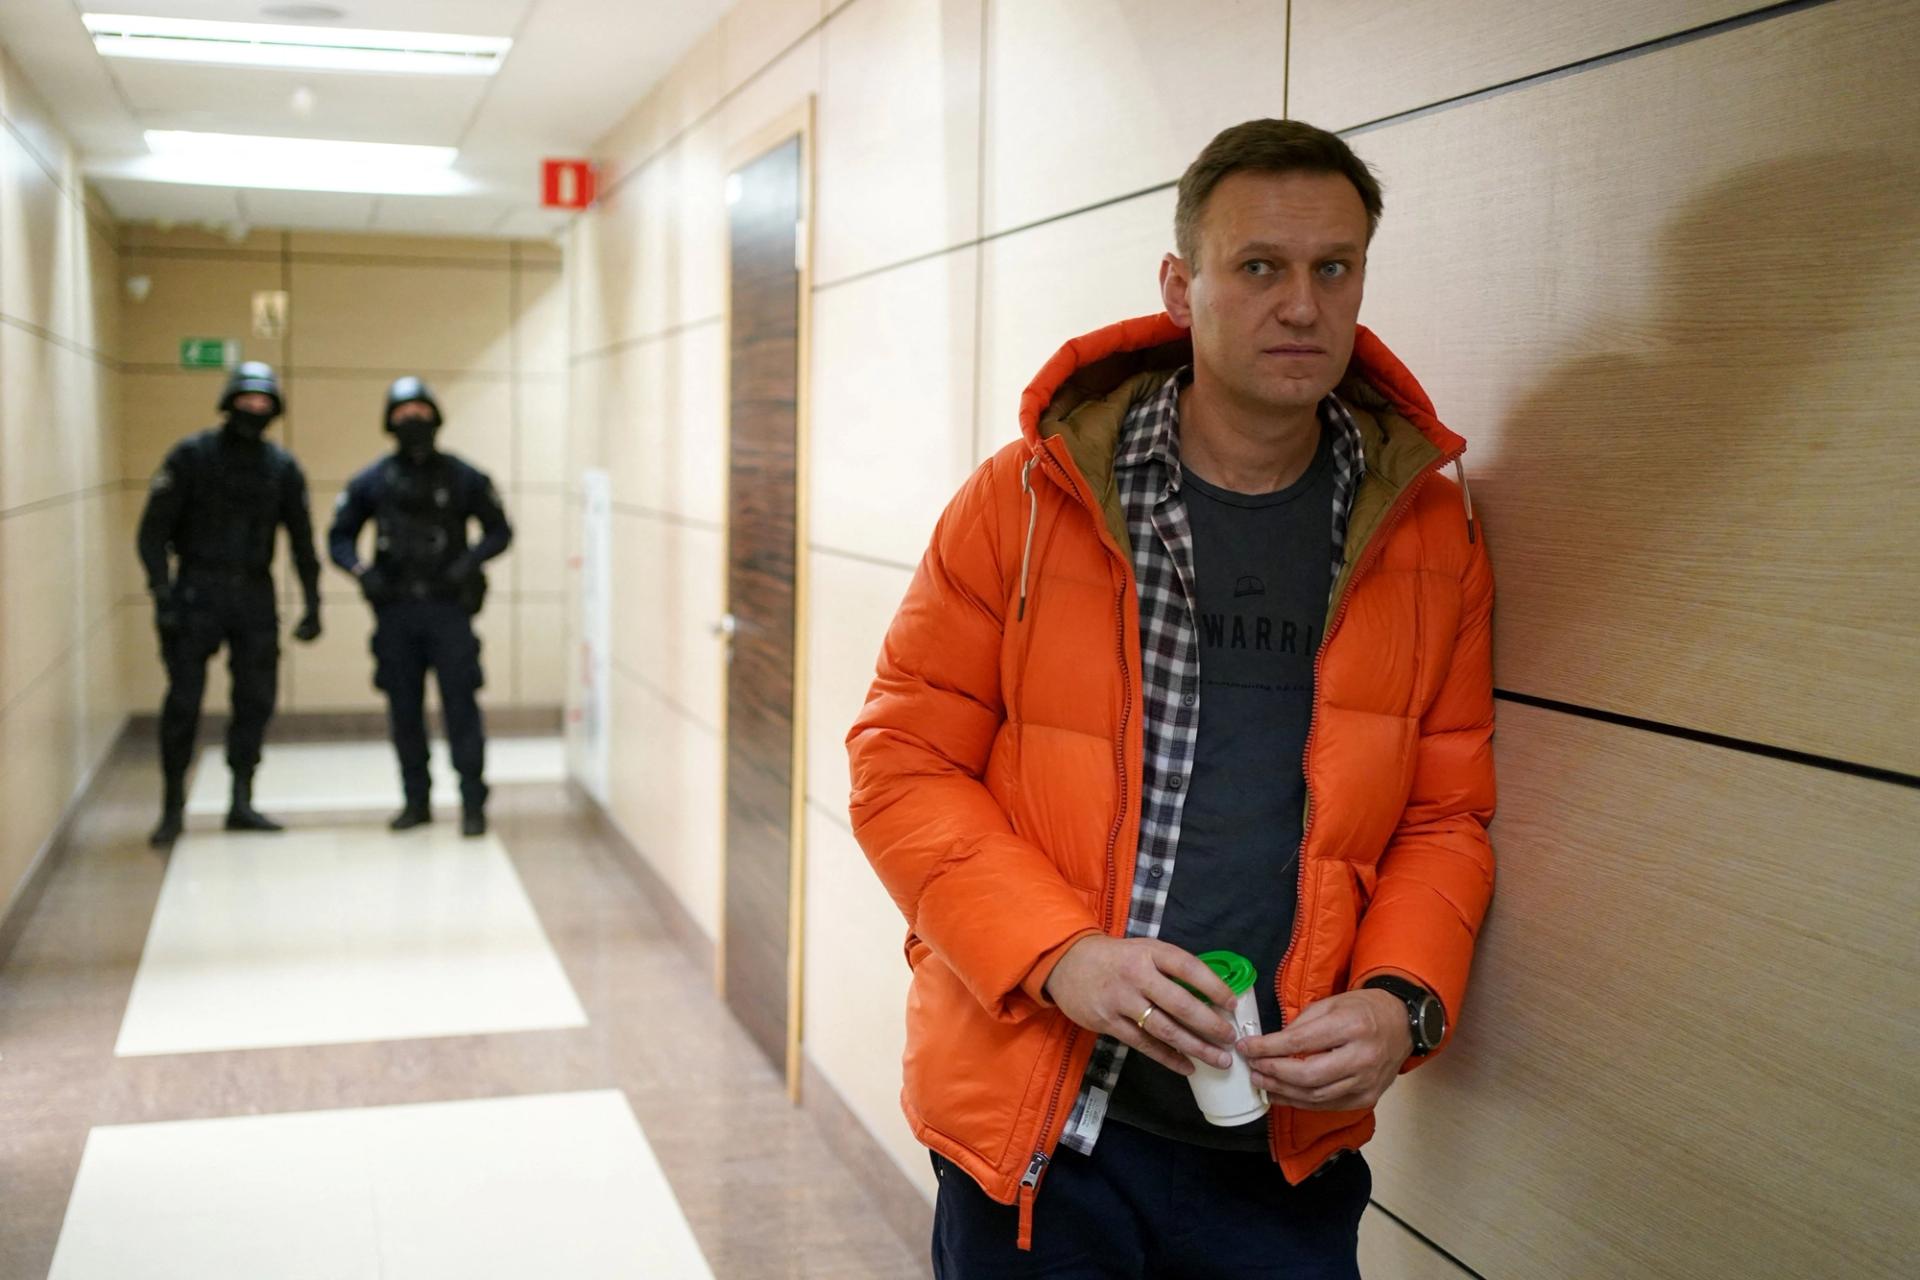 Russian opposition leader Alexei Navalny stands near law enforcement agents in a hallway of a business center that houses the office of his Anti-Corruption Foundation (FBK), in Moscow on Dec. 26, 2019.